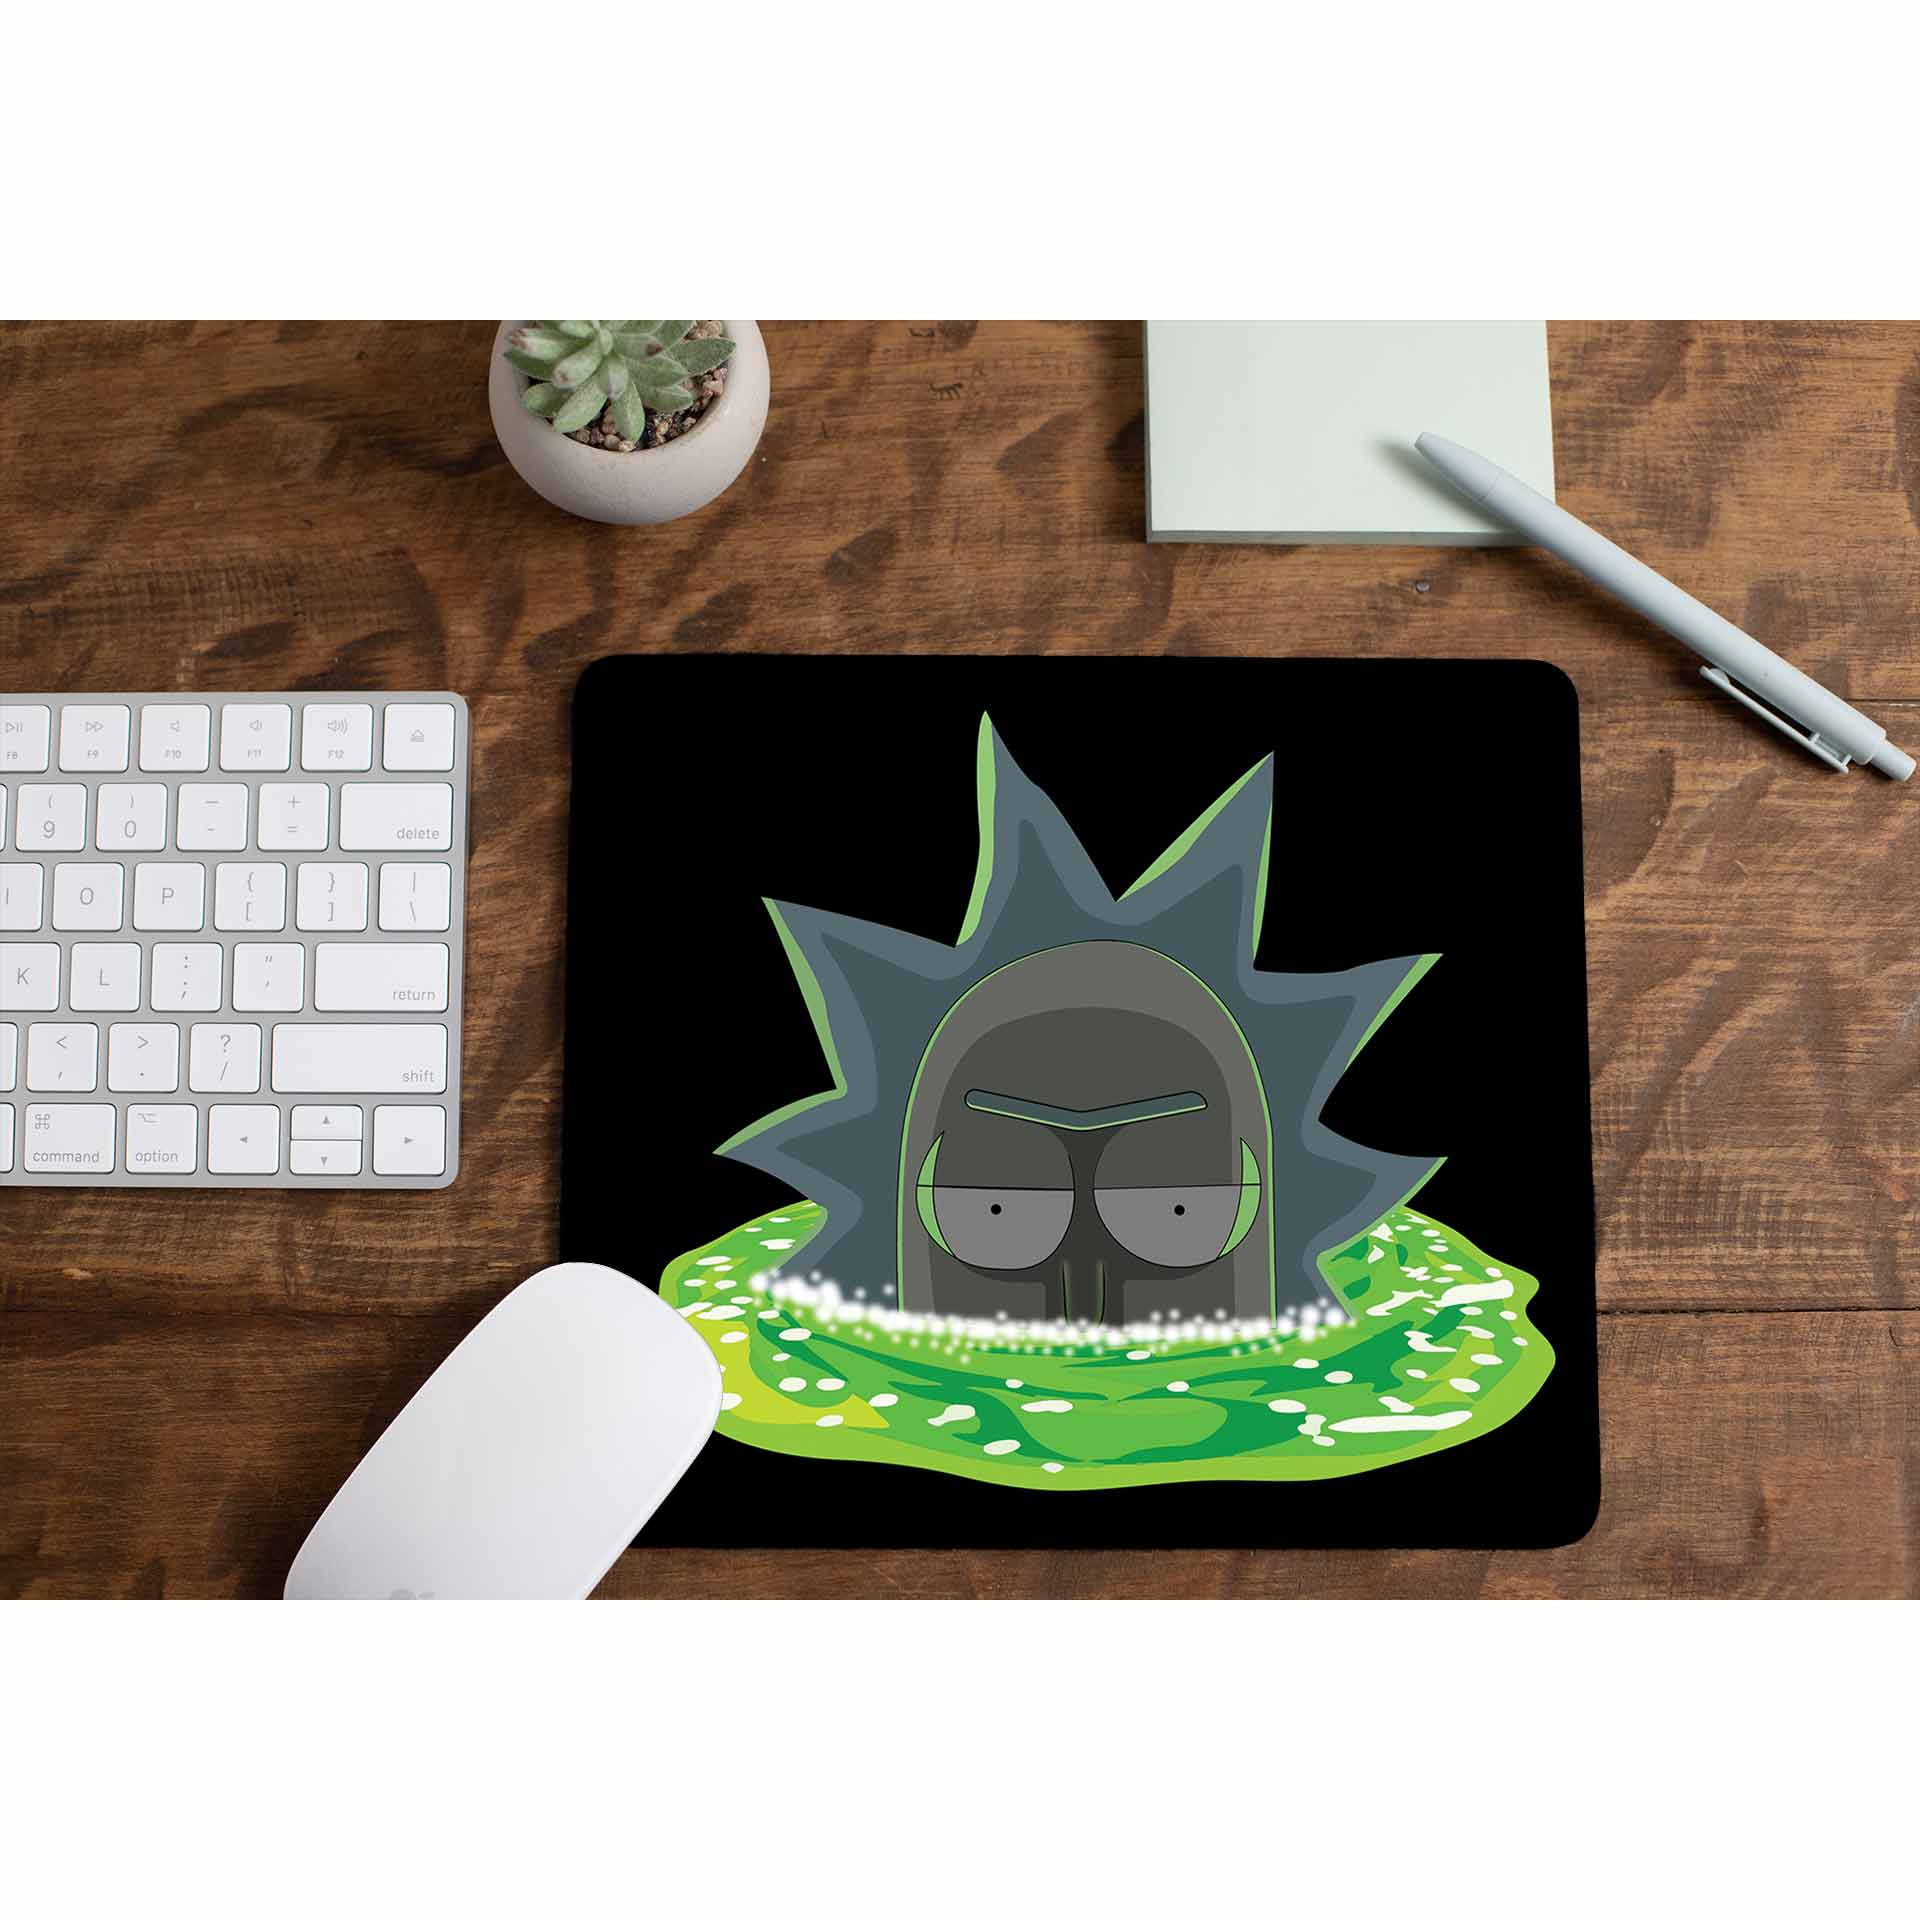 rick and morty teleportation mousepad logitech large anime buy online india the banyan tee tbt men women girls boys unisex  rick and morty online summer beth mr meeseeks jerry quote vector art clothing accessories merchandise